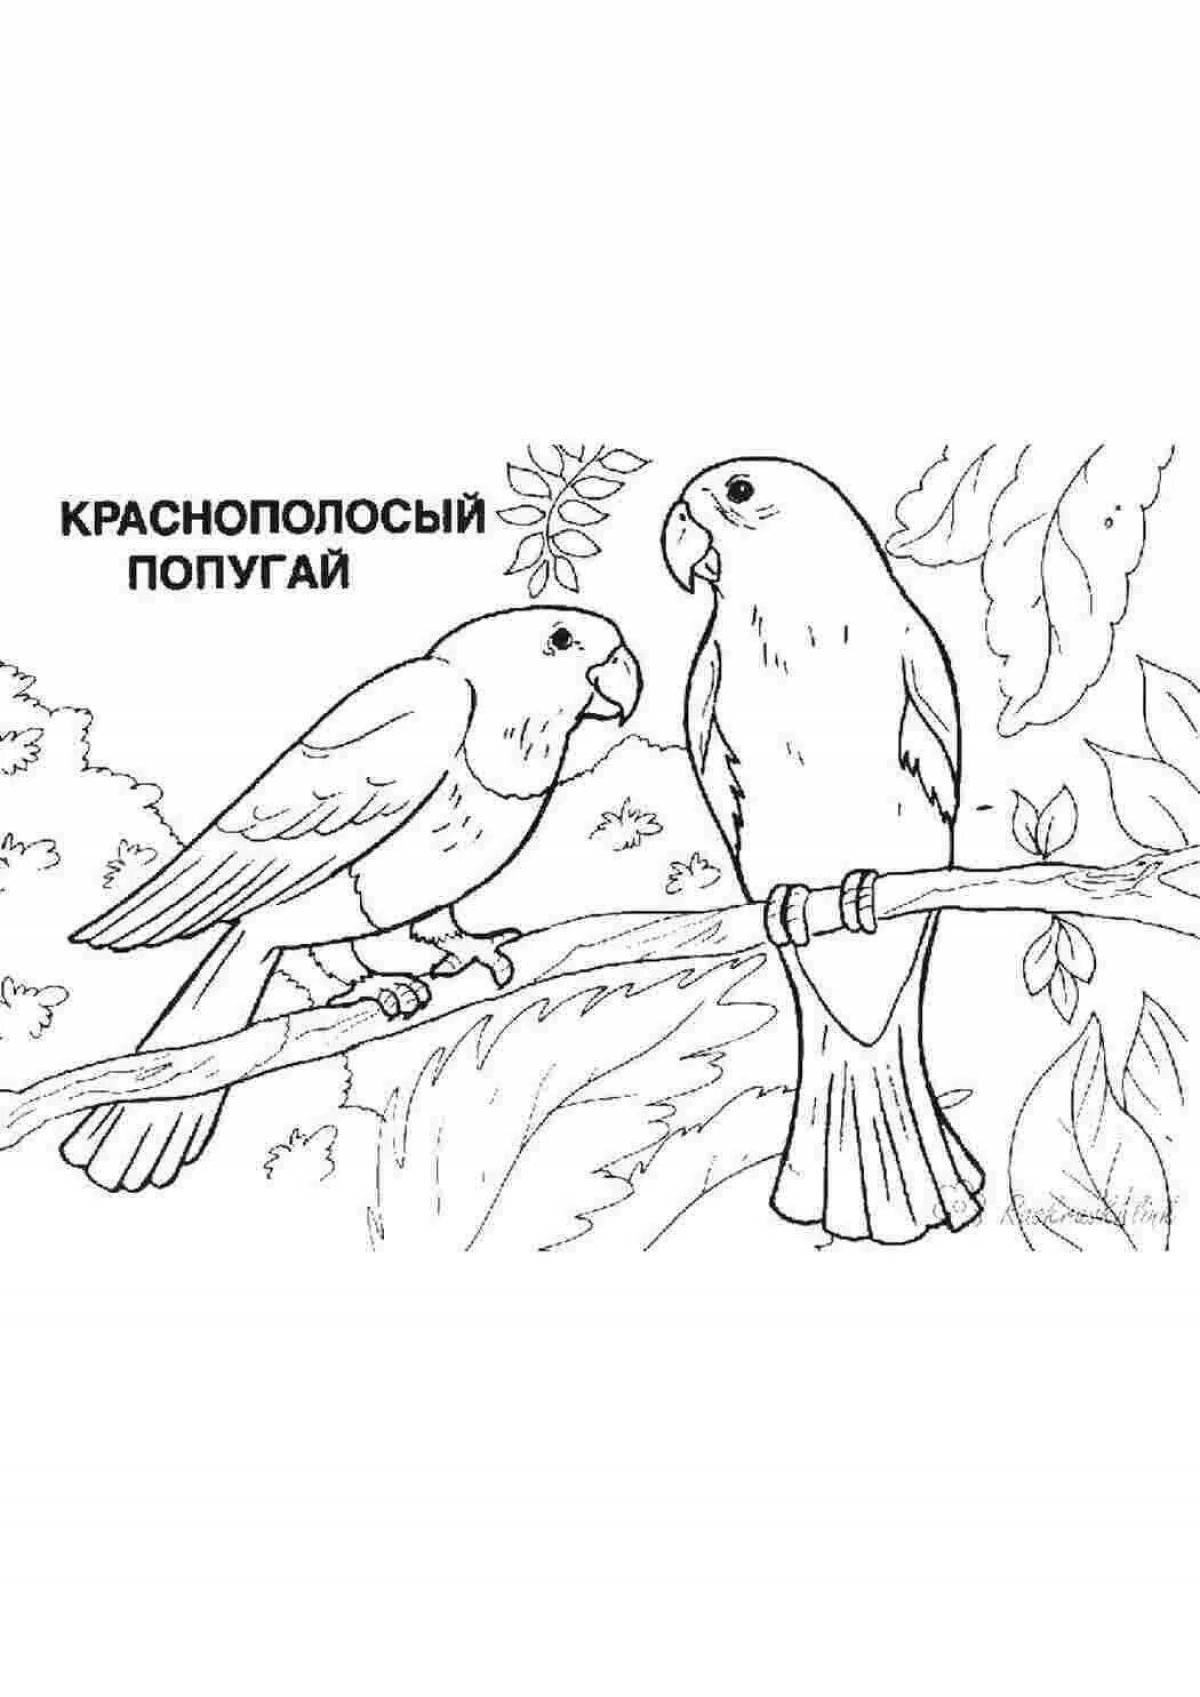 Fascinating coloring of the animals of the red book of Russia for children